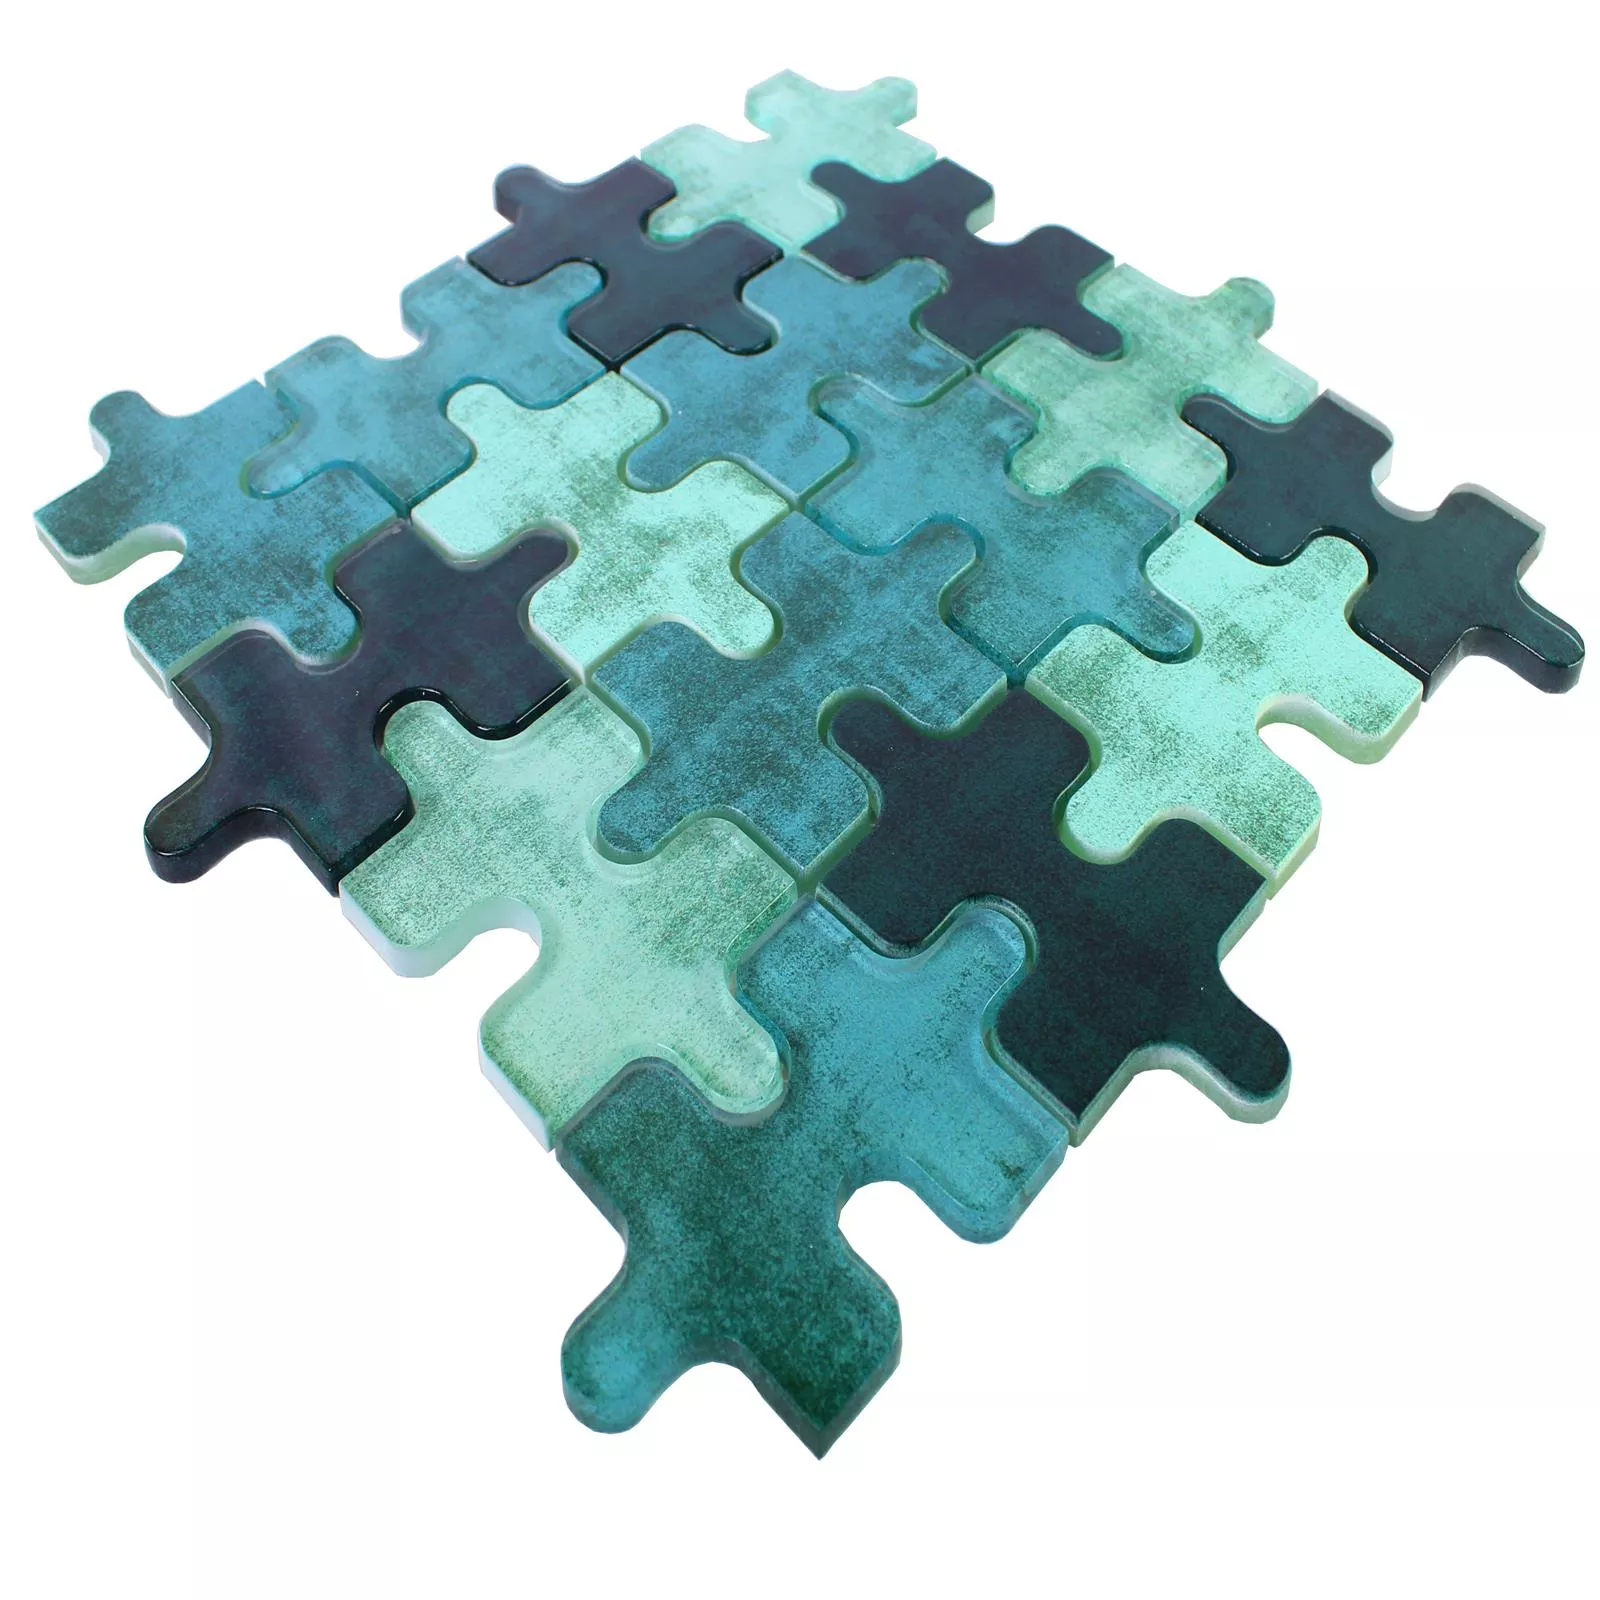 Glass Mosaic Tiles Puzzle Green